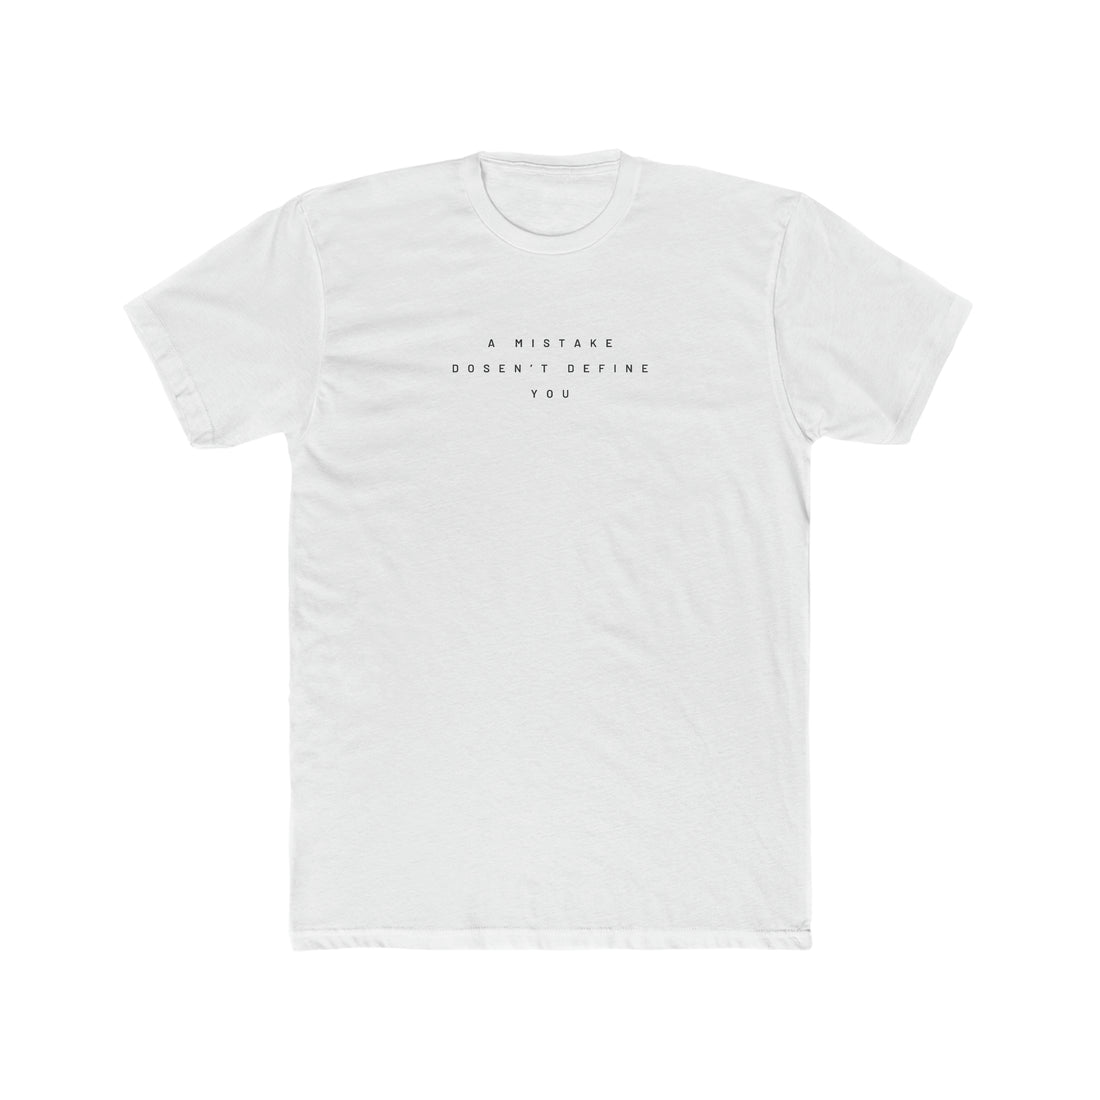 A Mistake Doesn't Define You Men's Tee - ProjecTee